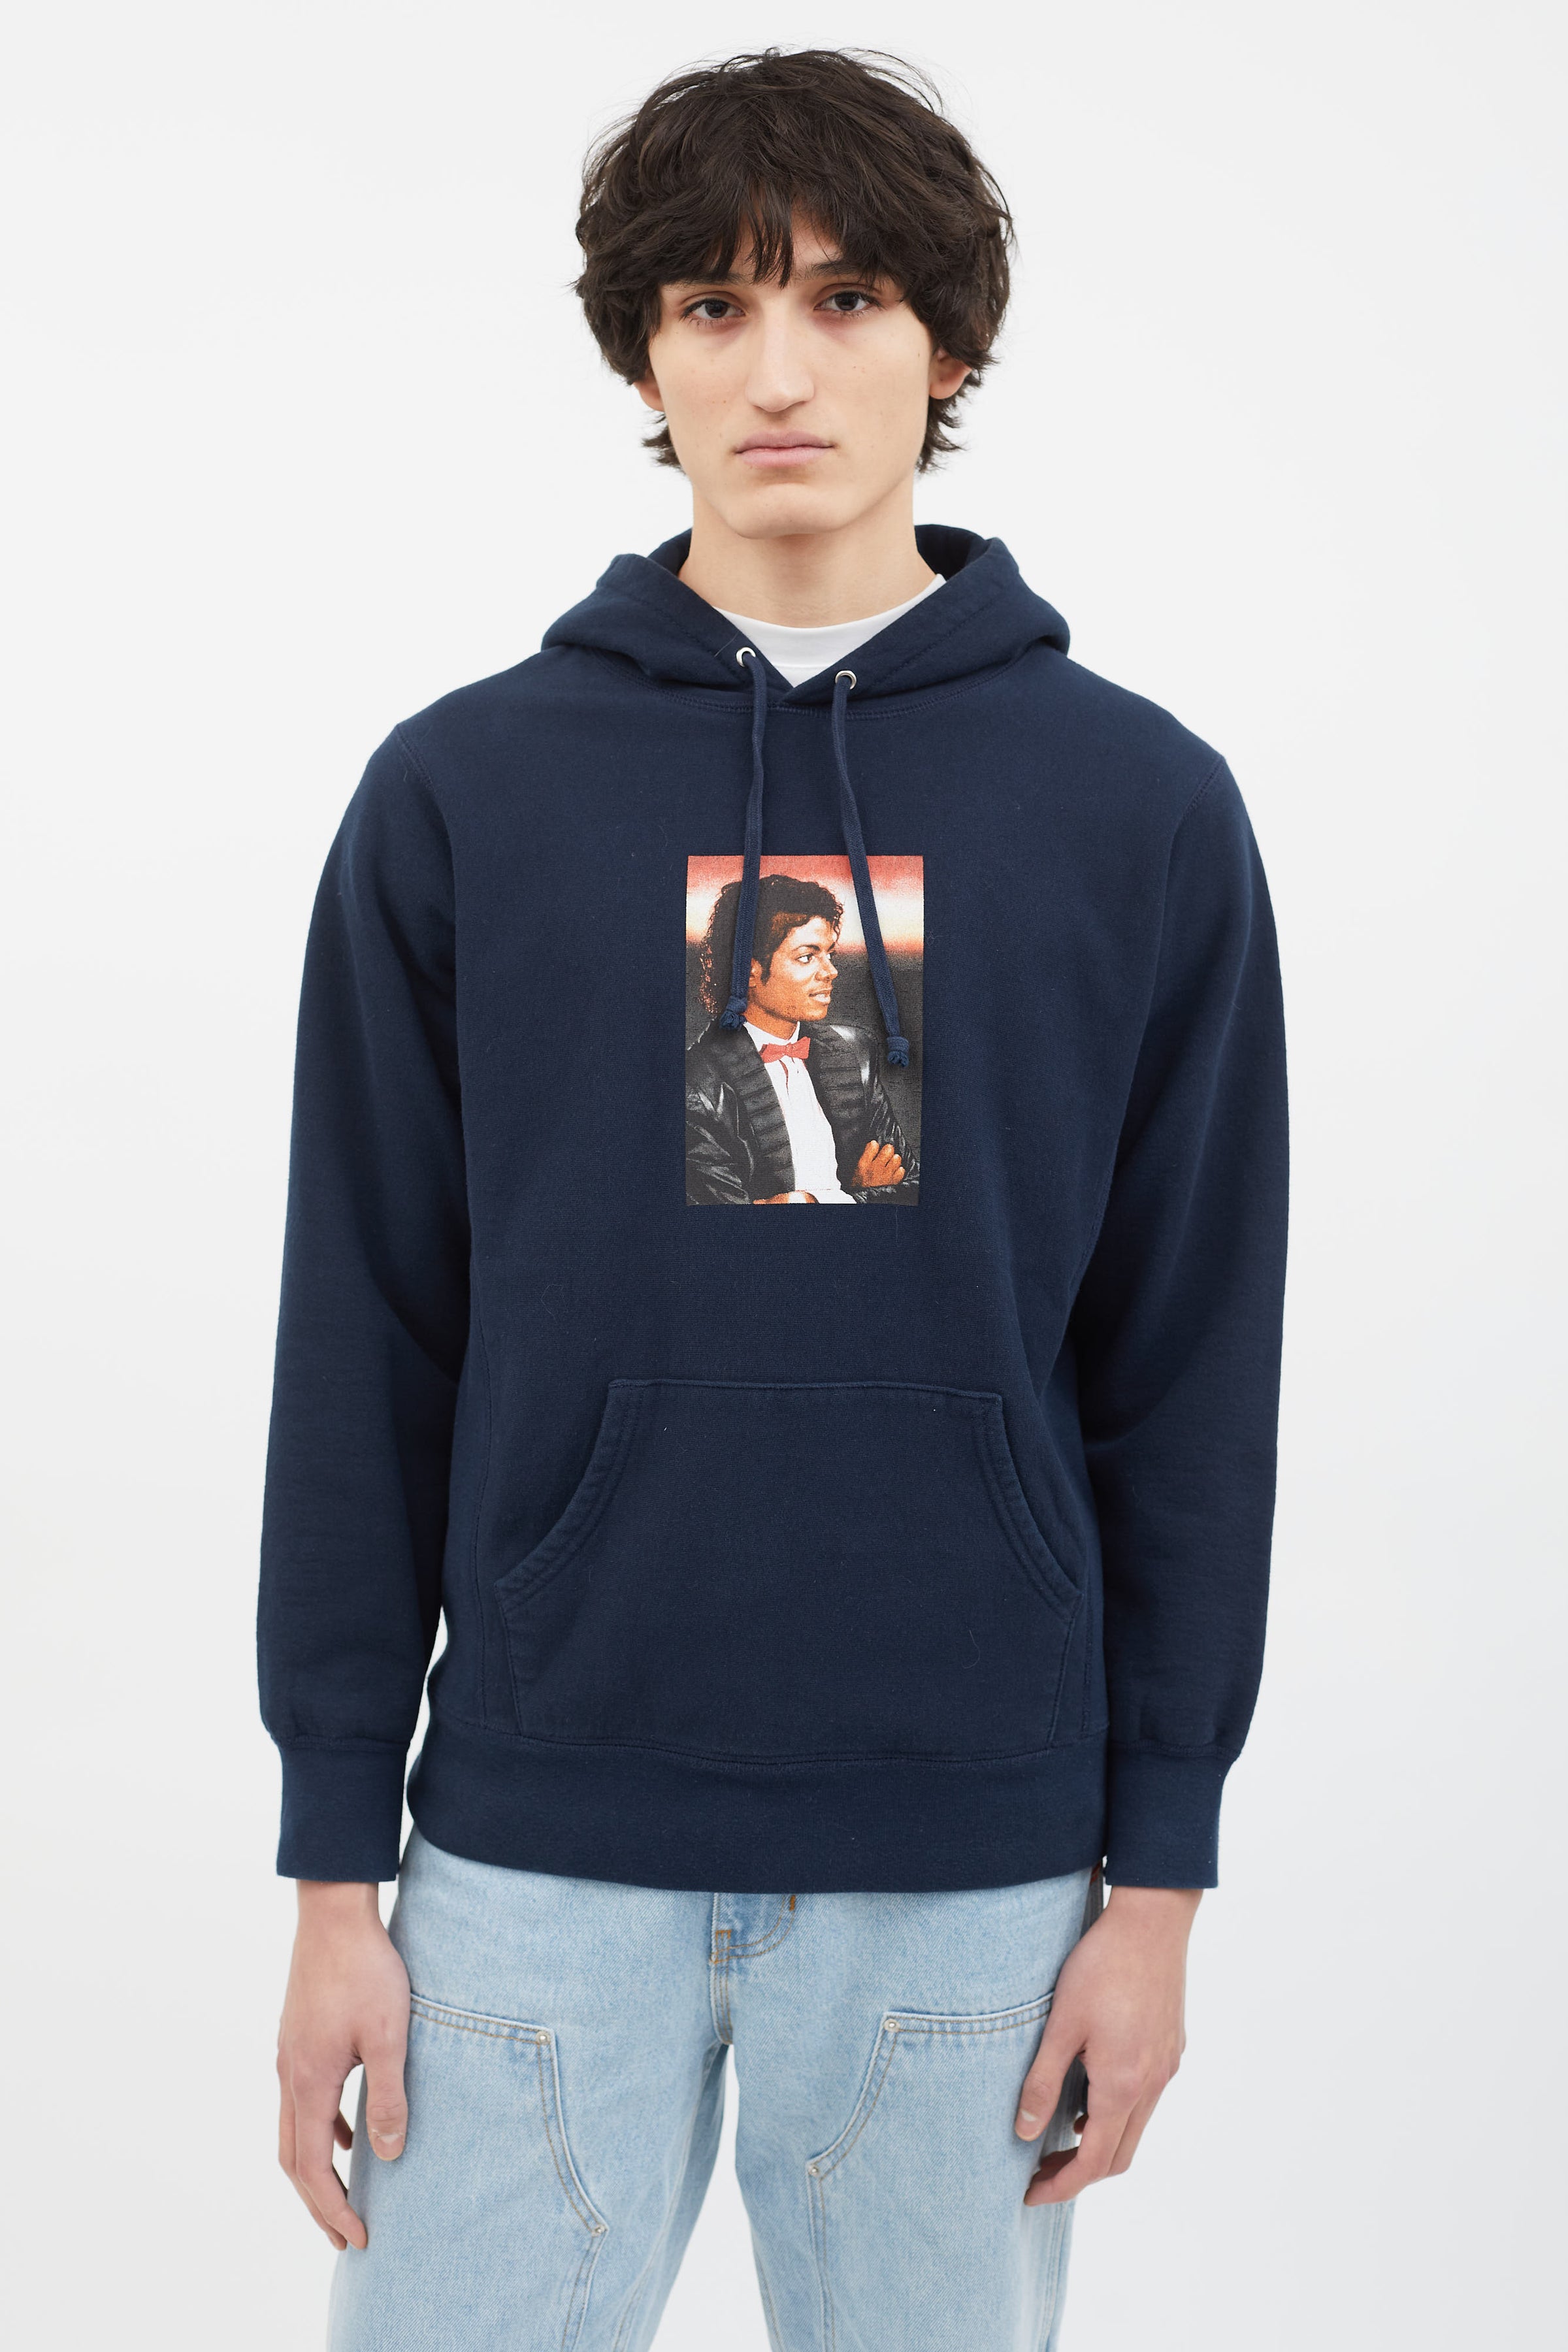 Supreme Pilled Sweater Blue